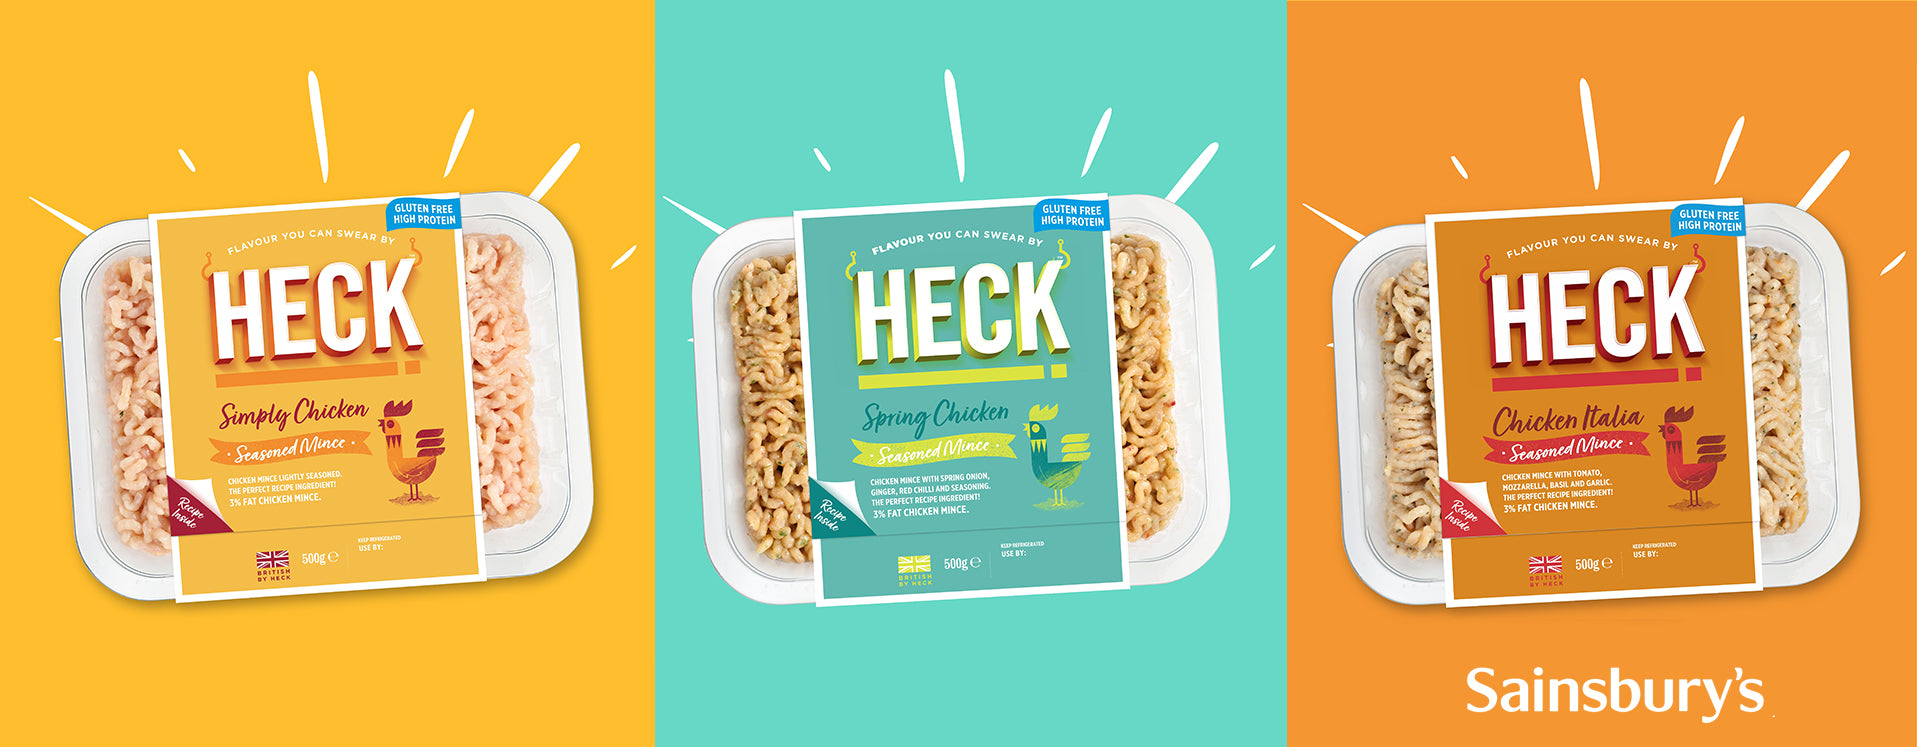 This Changes *Everything* - Three HECK Chicken Mince Flavours Brings A Whole New Purpose To Your Cooking